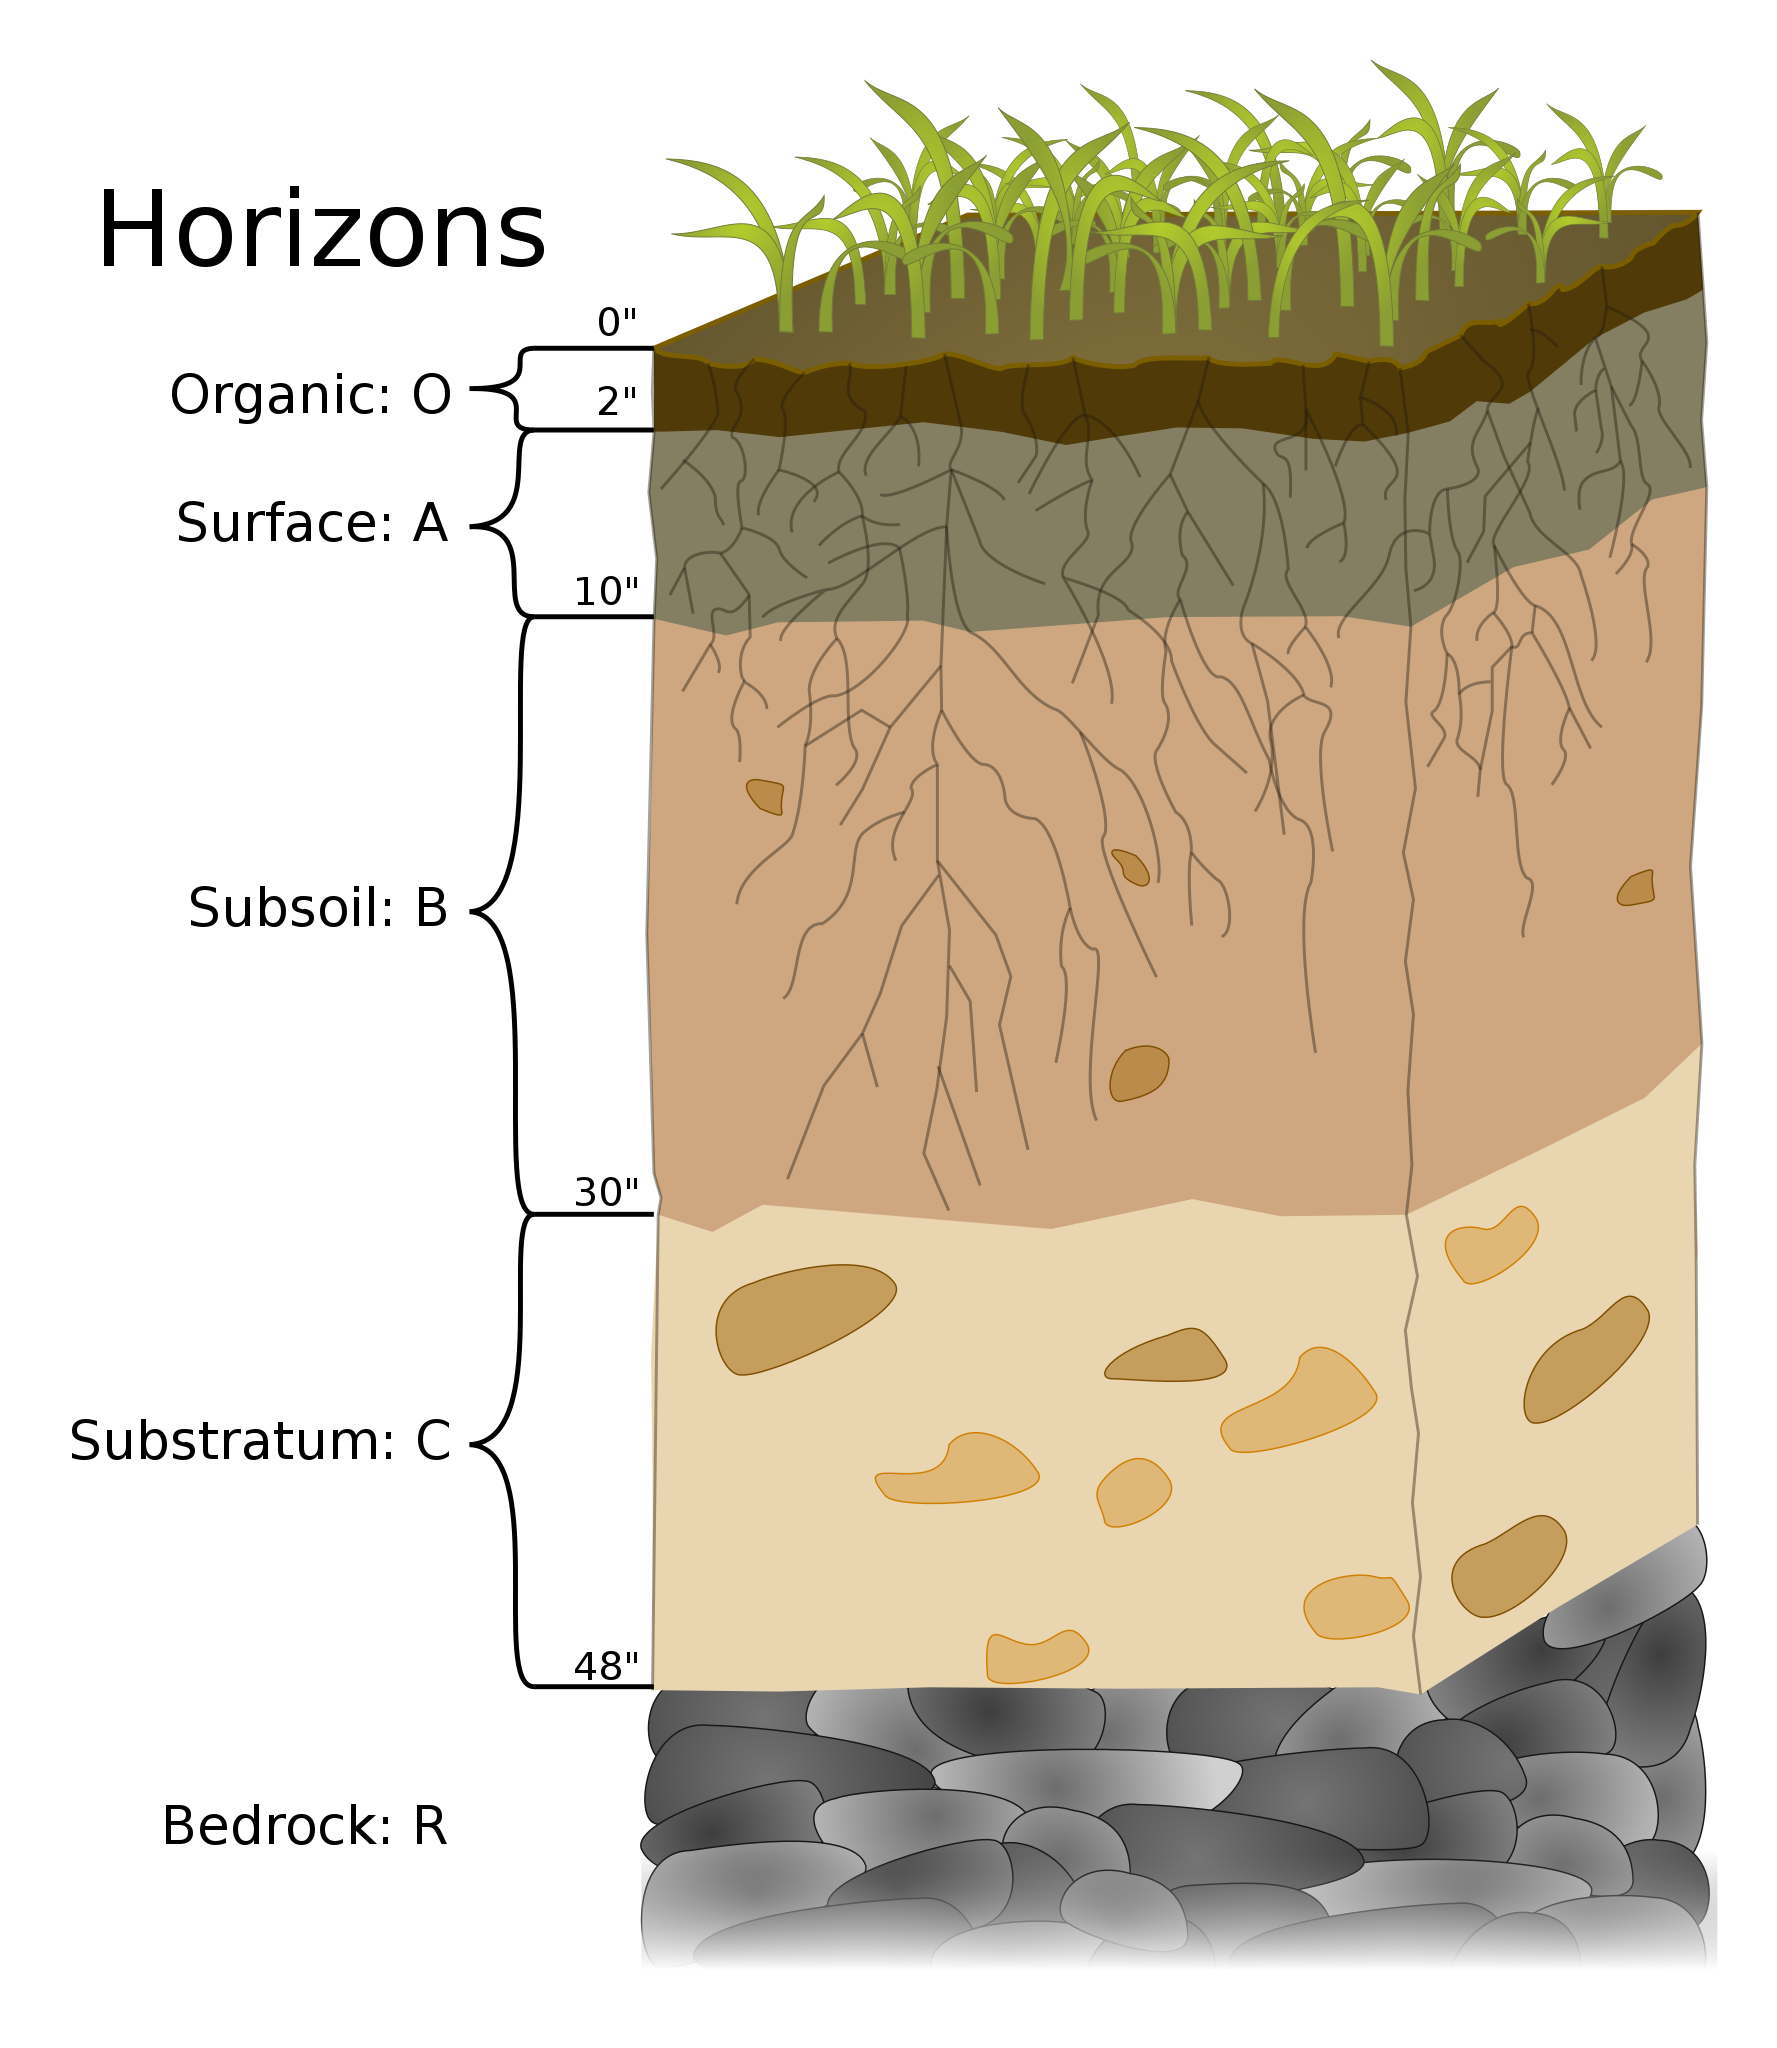 The image shows 5 soil layers, ranging from highly altered at the top, to unaltered at the bottom.